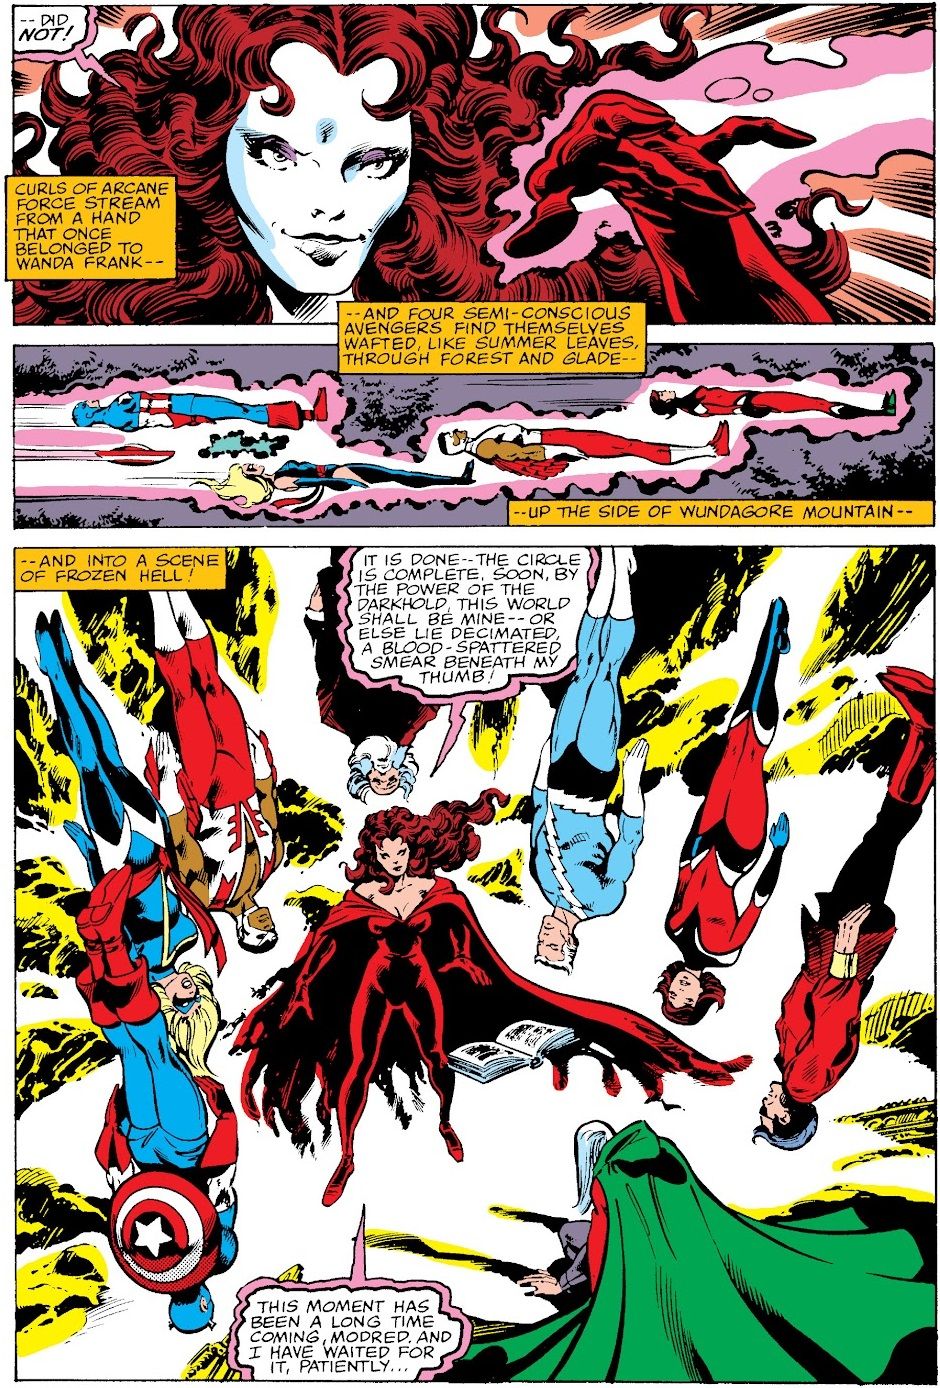 The Avengers fight against a demon-possessed Scarlet Witch